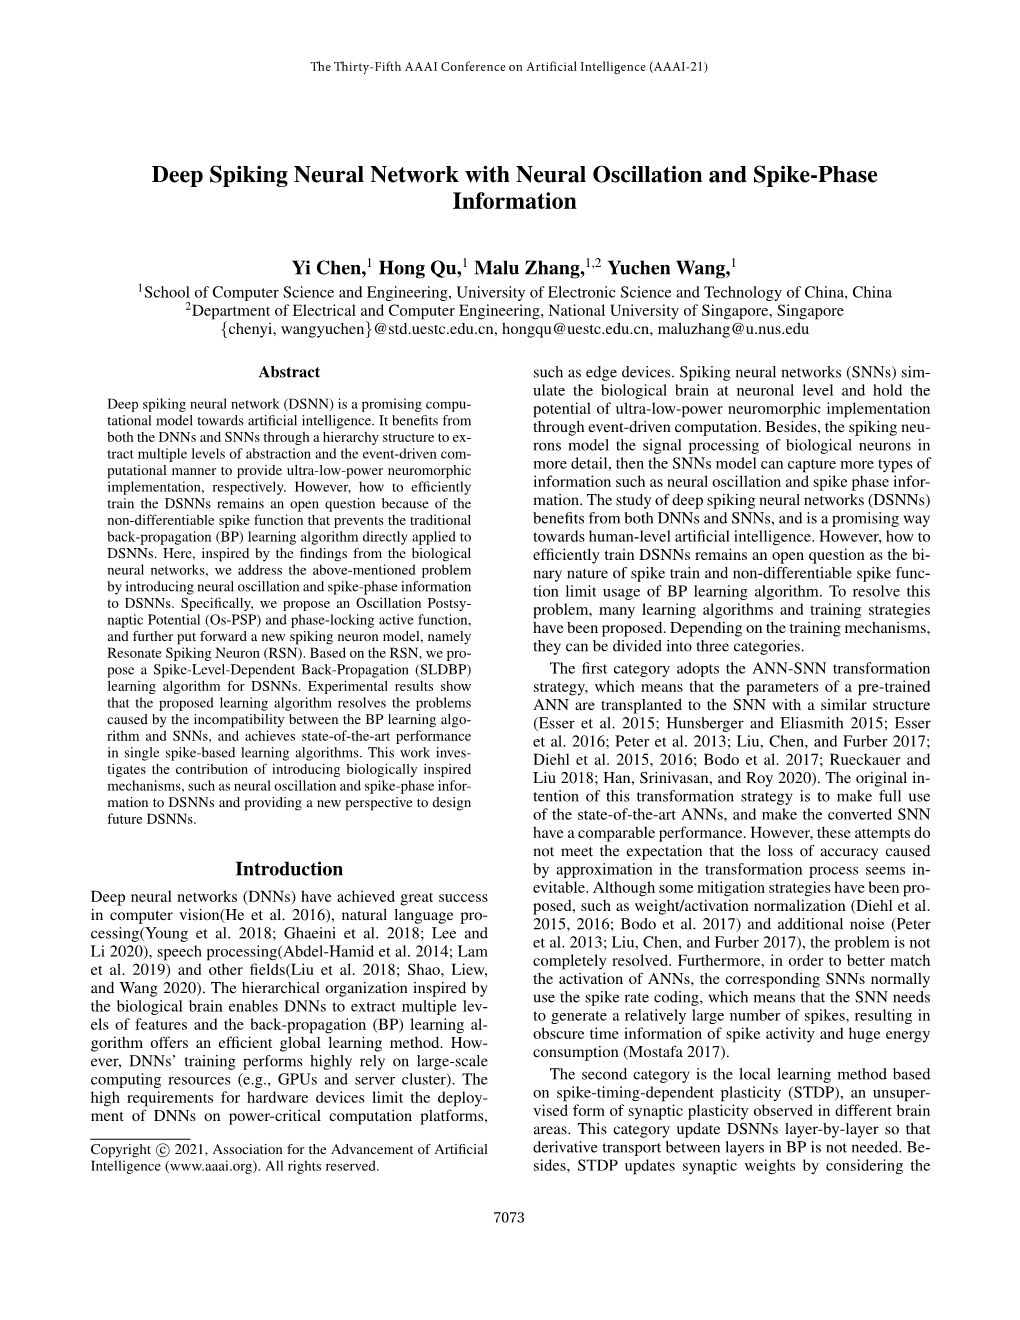 Deep Spiking Neural Network with Neural Oscillation and Spike-Phase Information